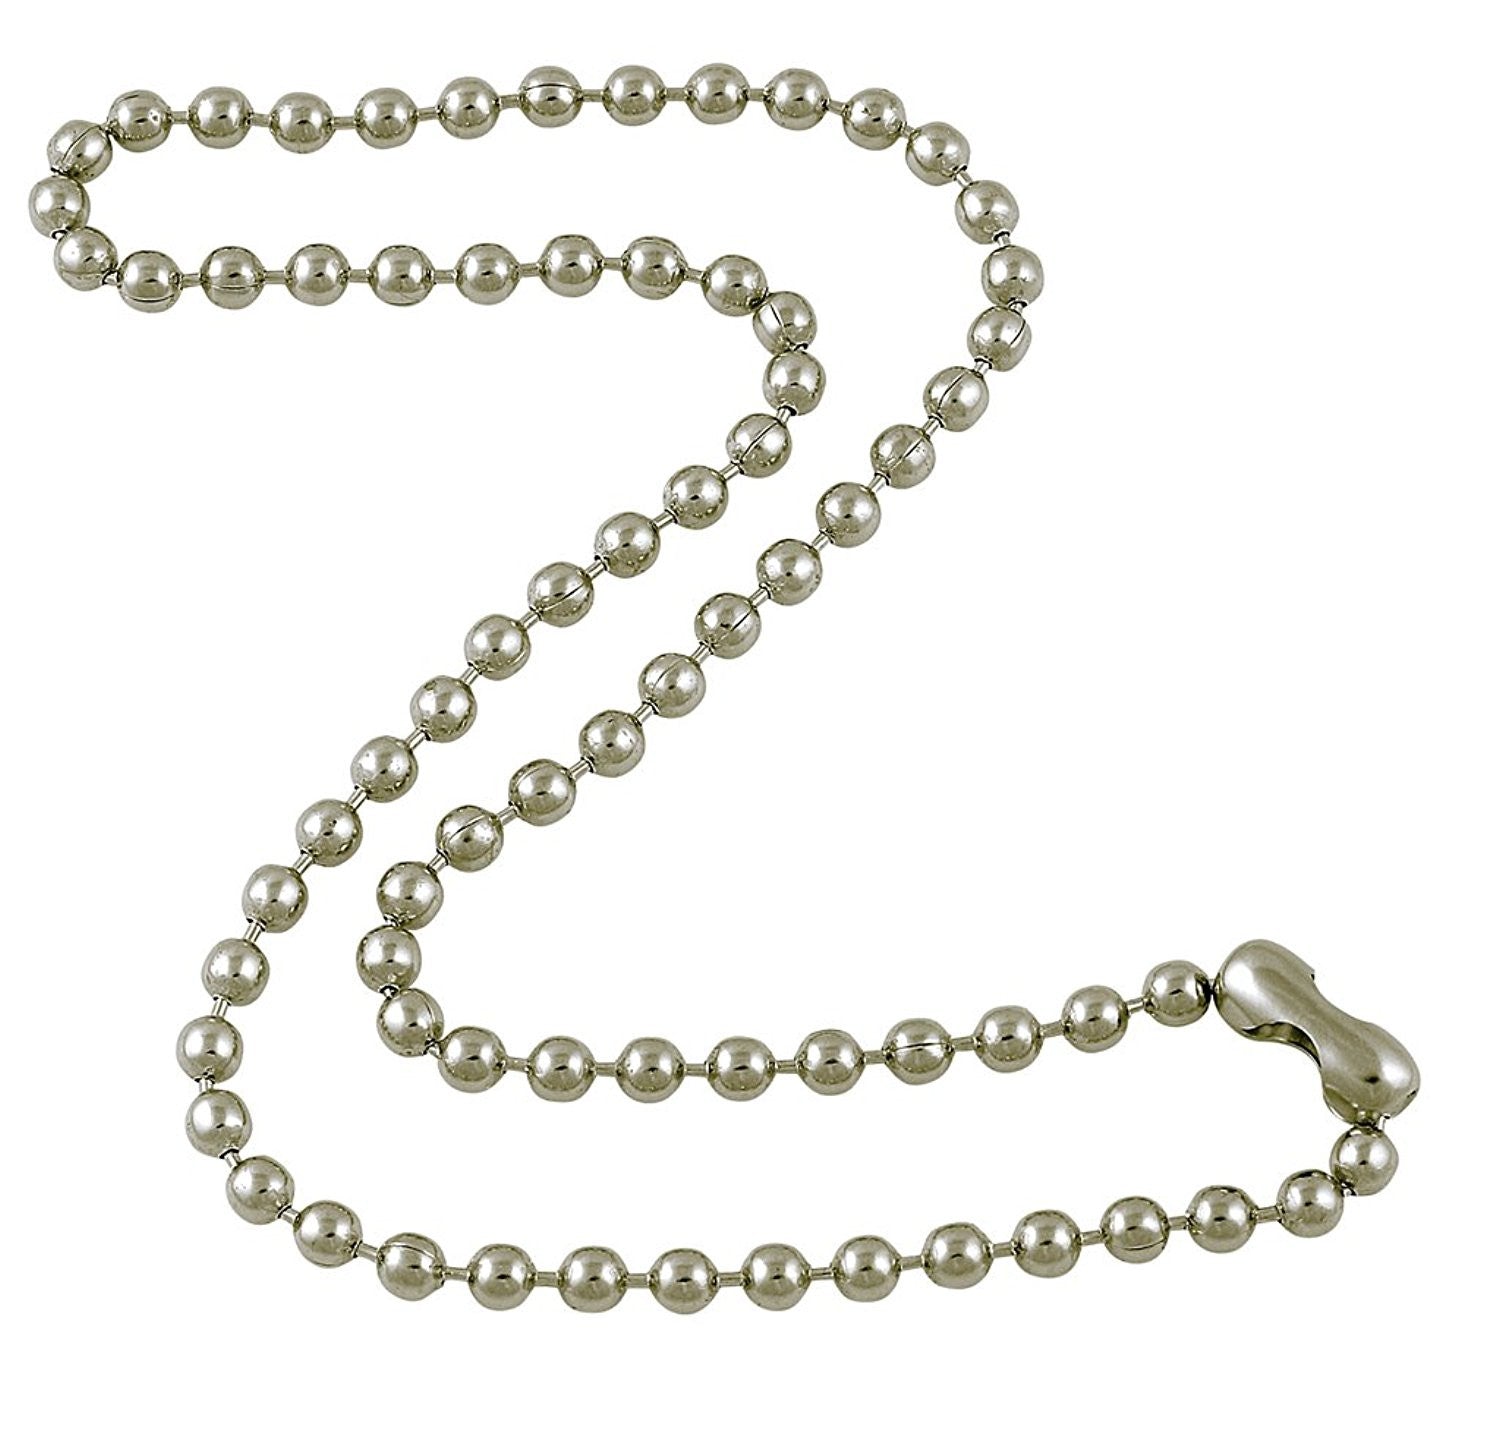 4.8mm Large Silver Tone Steel Ball Chain Necklace with Extra Durable C